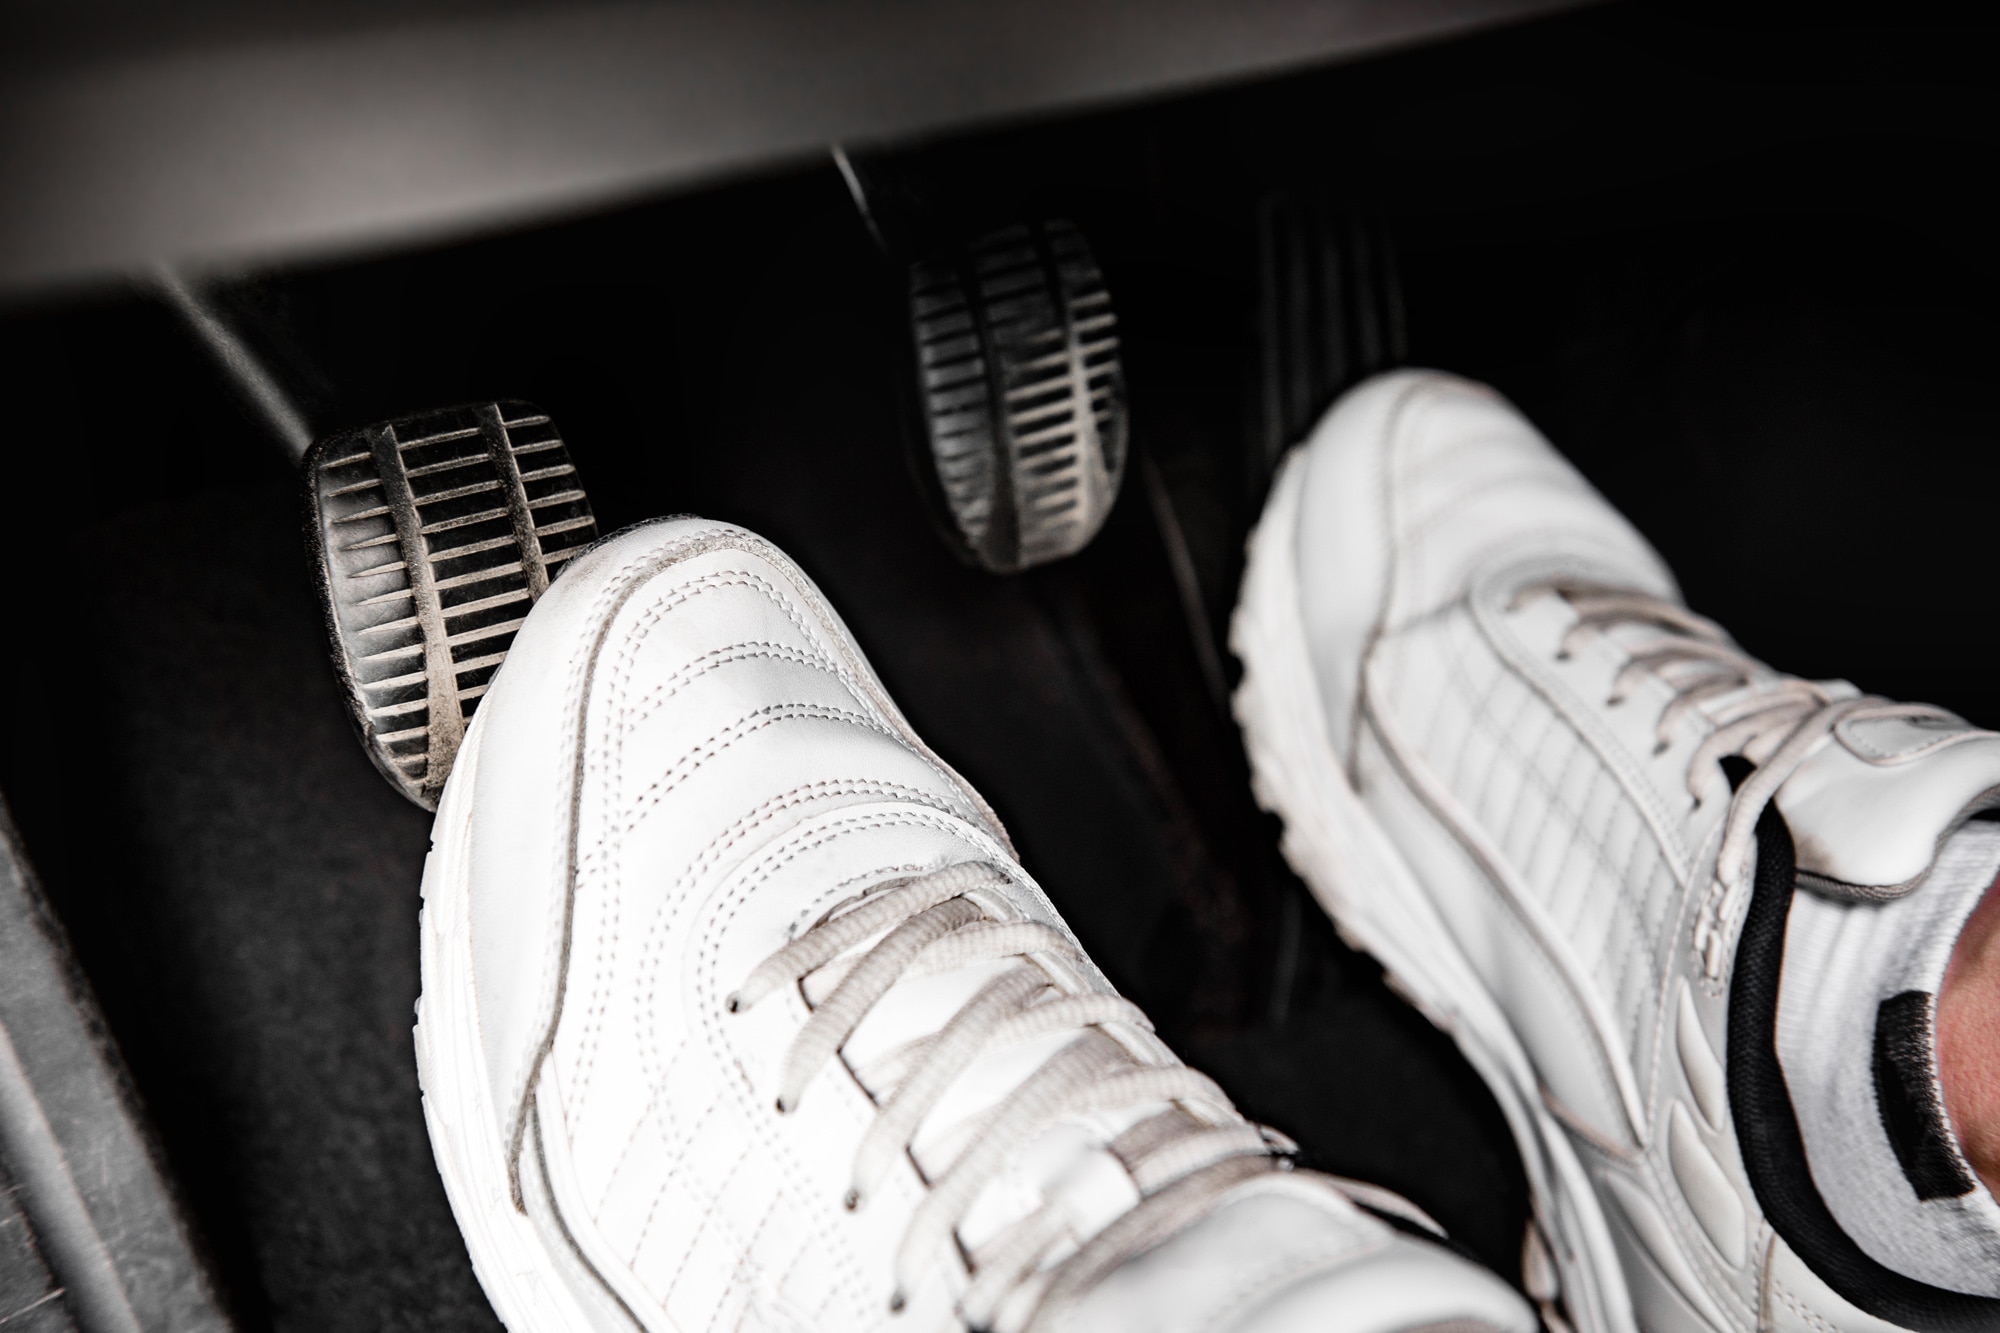 Close-up of a person with white shoes pressing the clutch pedal of a car.